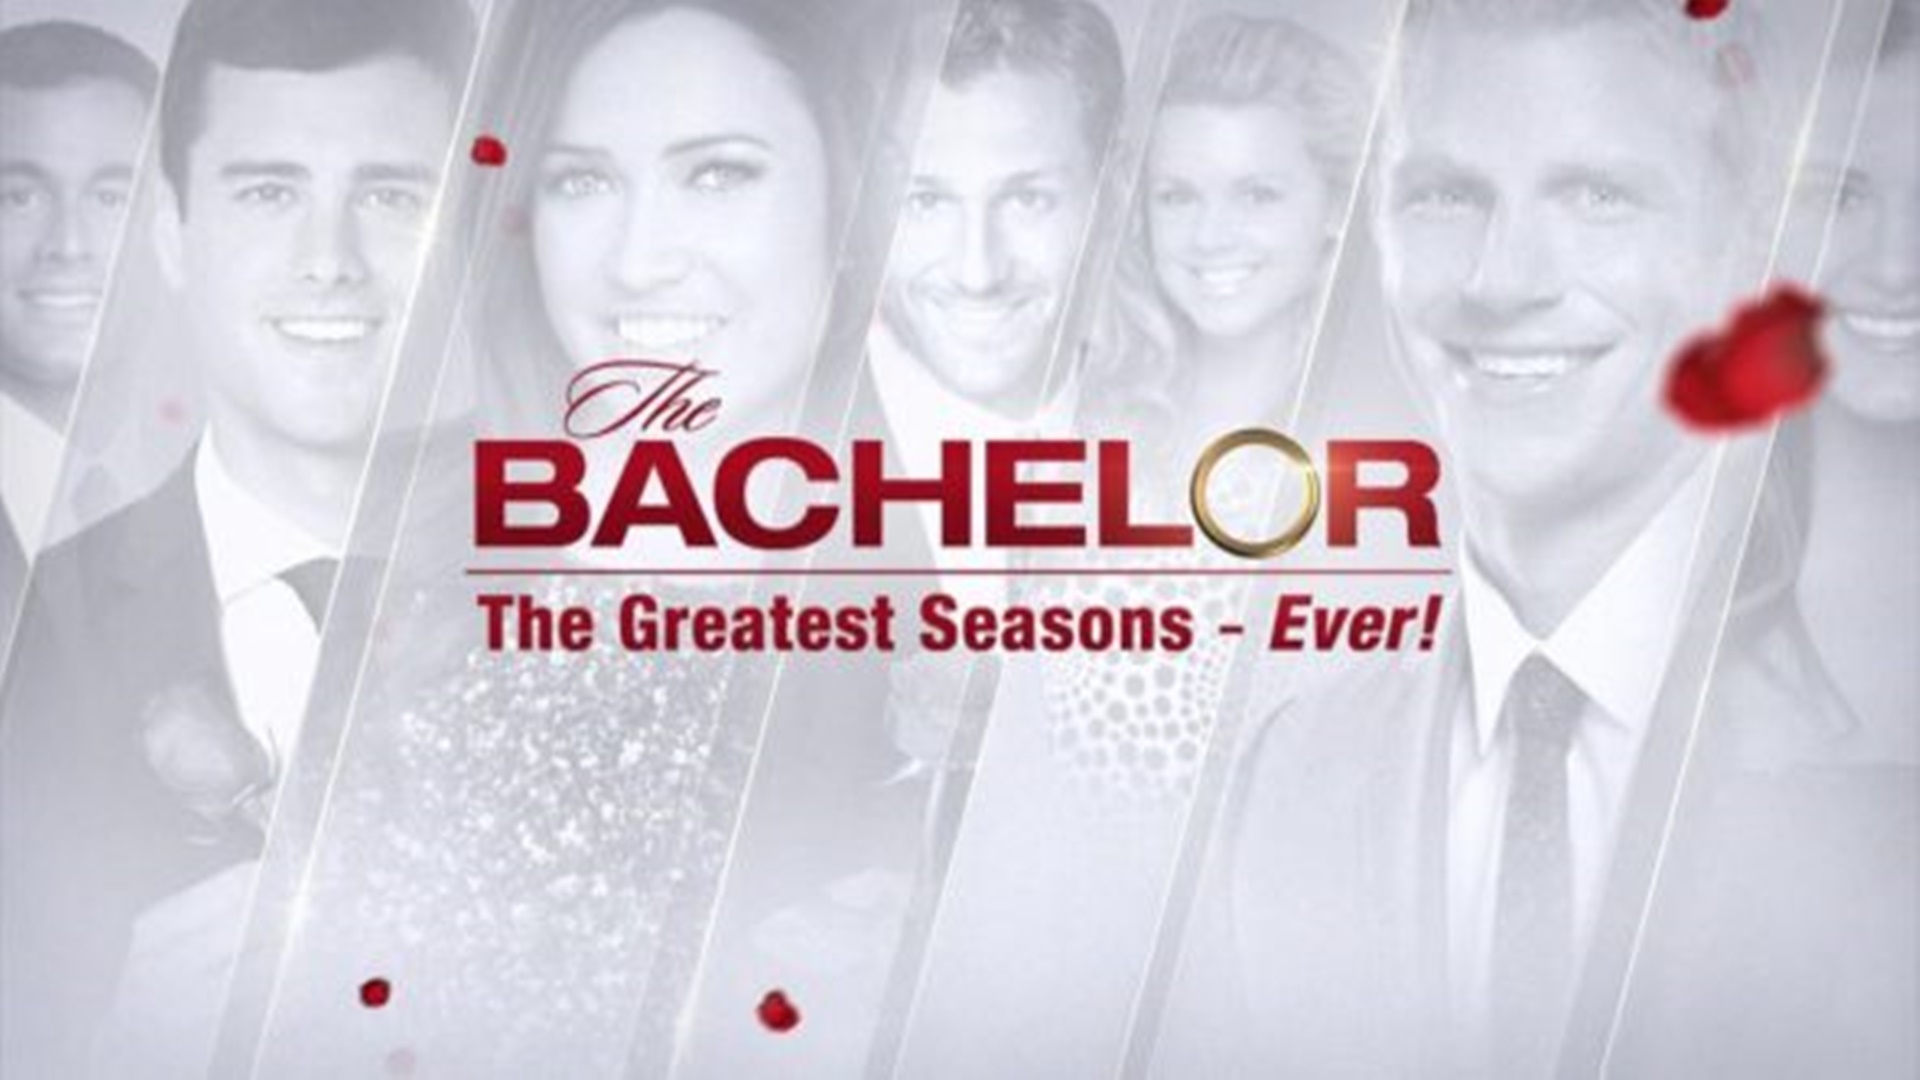 The Bachelor: The Greatest Seasons — Ever! (TV Series 2020 - Now) - What Is The Most Watched Season Of The Bachelor